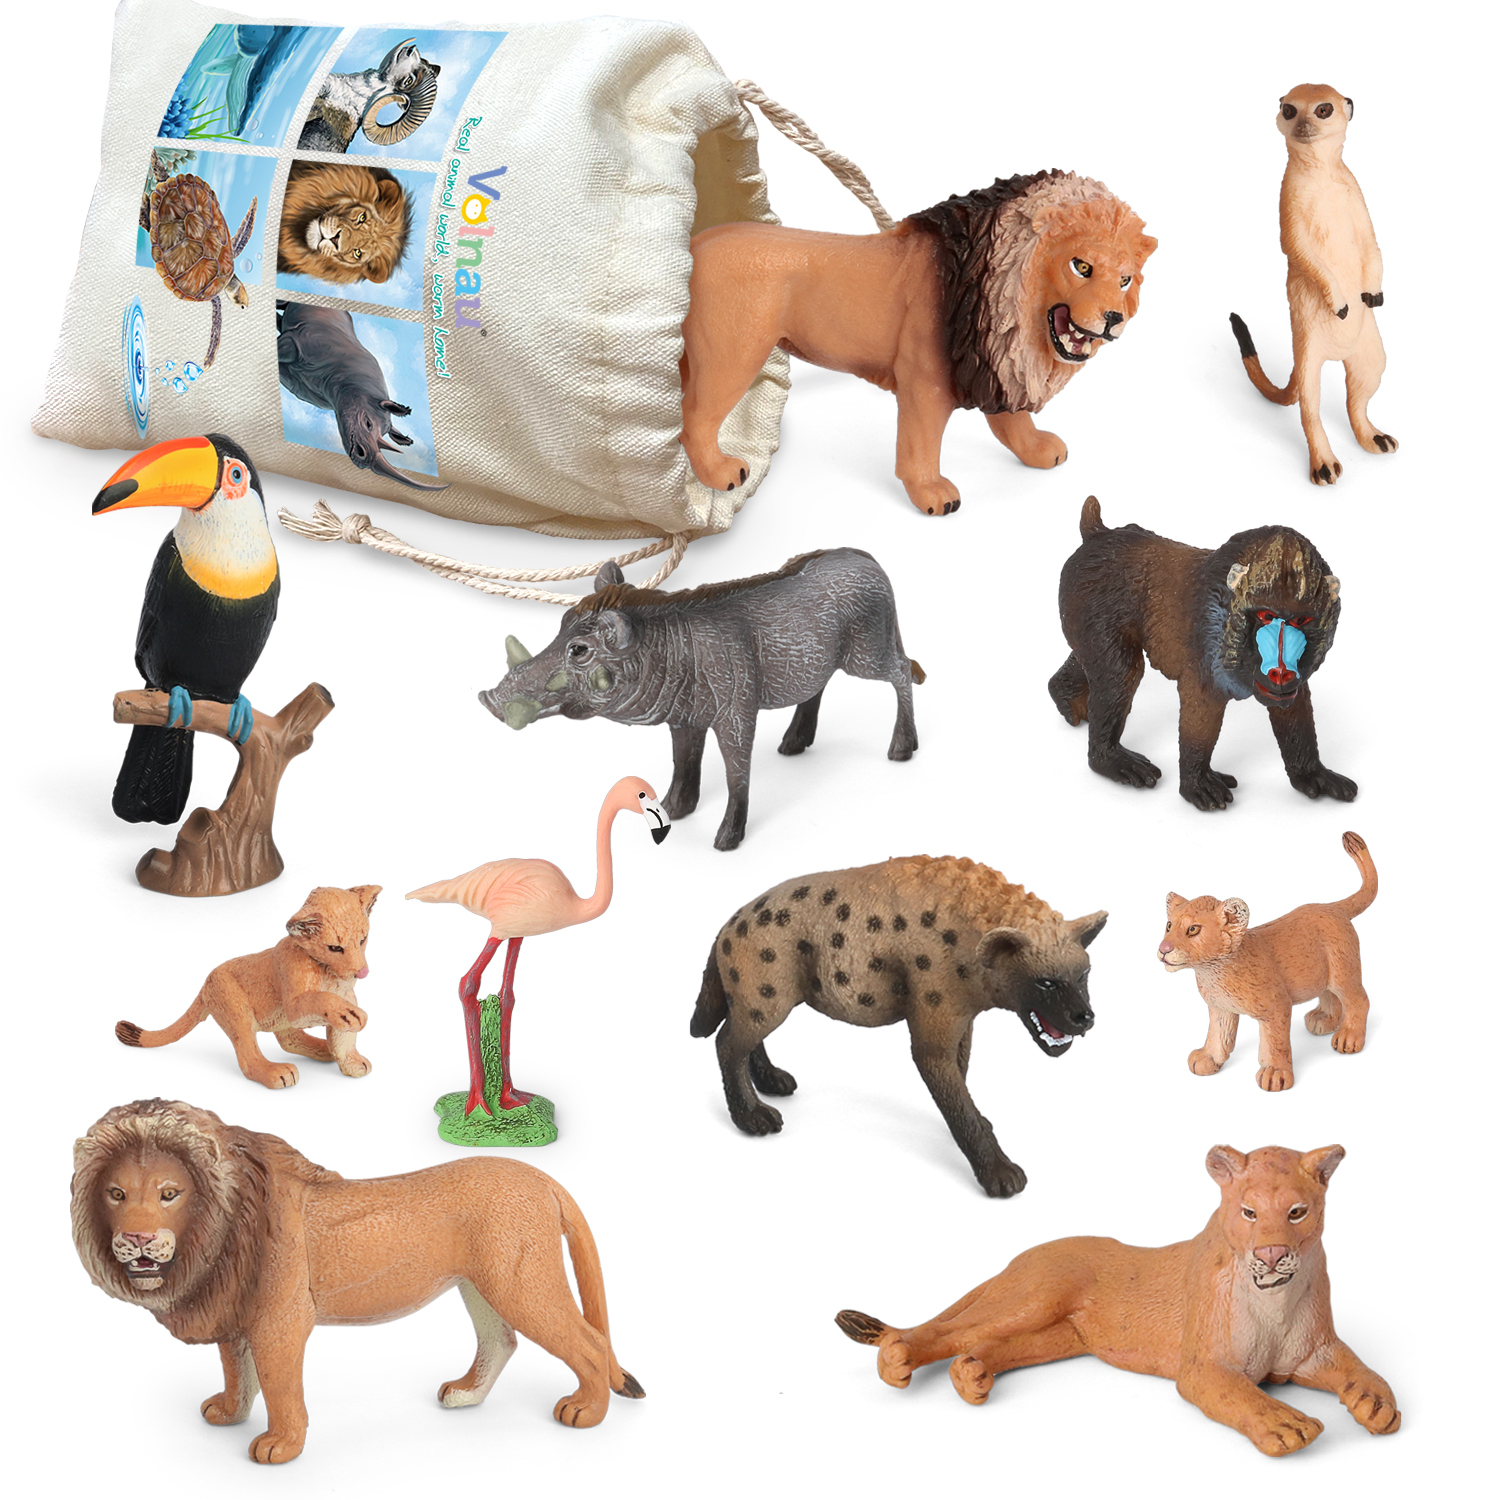 https://images.51microshop.com/9558/product/20220410/Volnau_11_Pcs_Africa_Lion_King_Animal_Toys_Figurines_Animals_Figures_Zoo_Pack_for_Kids_Christmas_Birthday_Gift_Preschool_Educational_and_Lion_Jungle_Forest_King_Animals_Sets_1649557139544_0.jpg